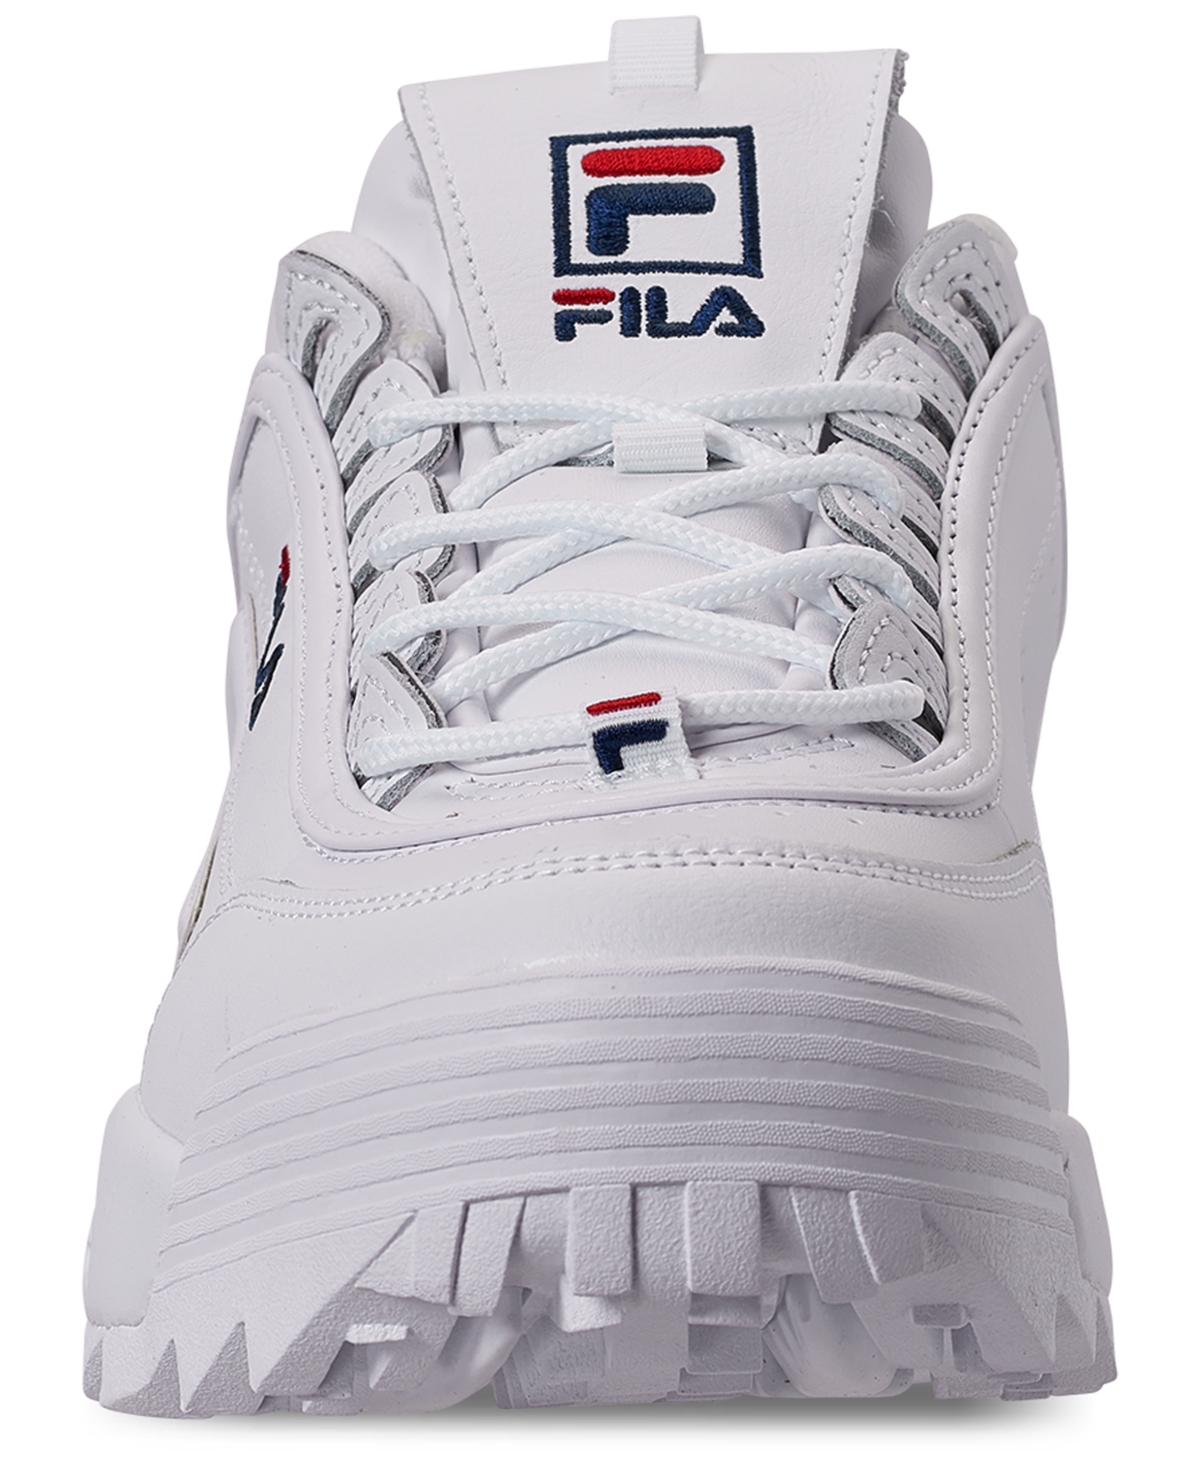 Shop Fila Men's Disruptor Ii Casual Athletic Sneakers From Finish Line In White, Navy, Red